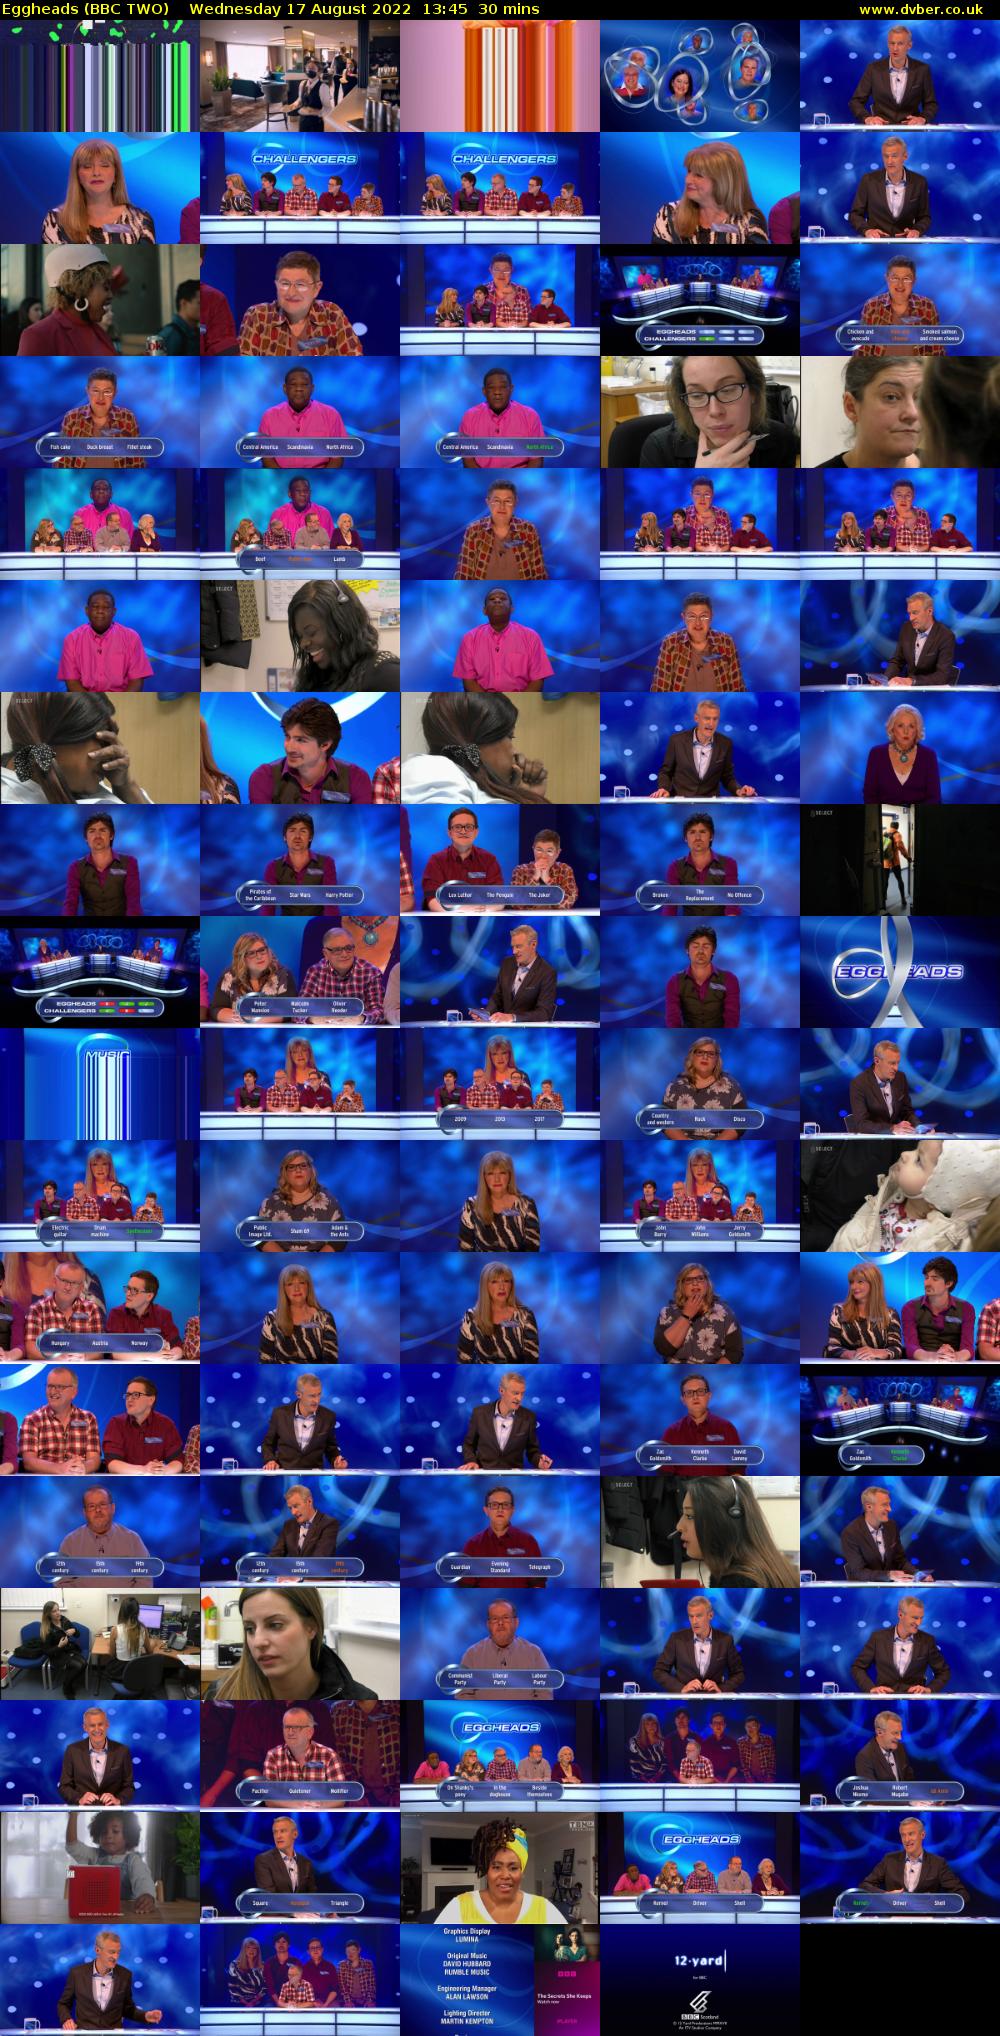 Eggheads (BBC TWO) Wednesday 17 August 2022 13:45 - 14:15